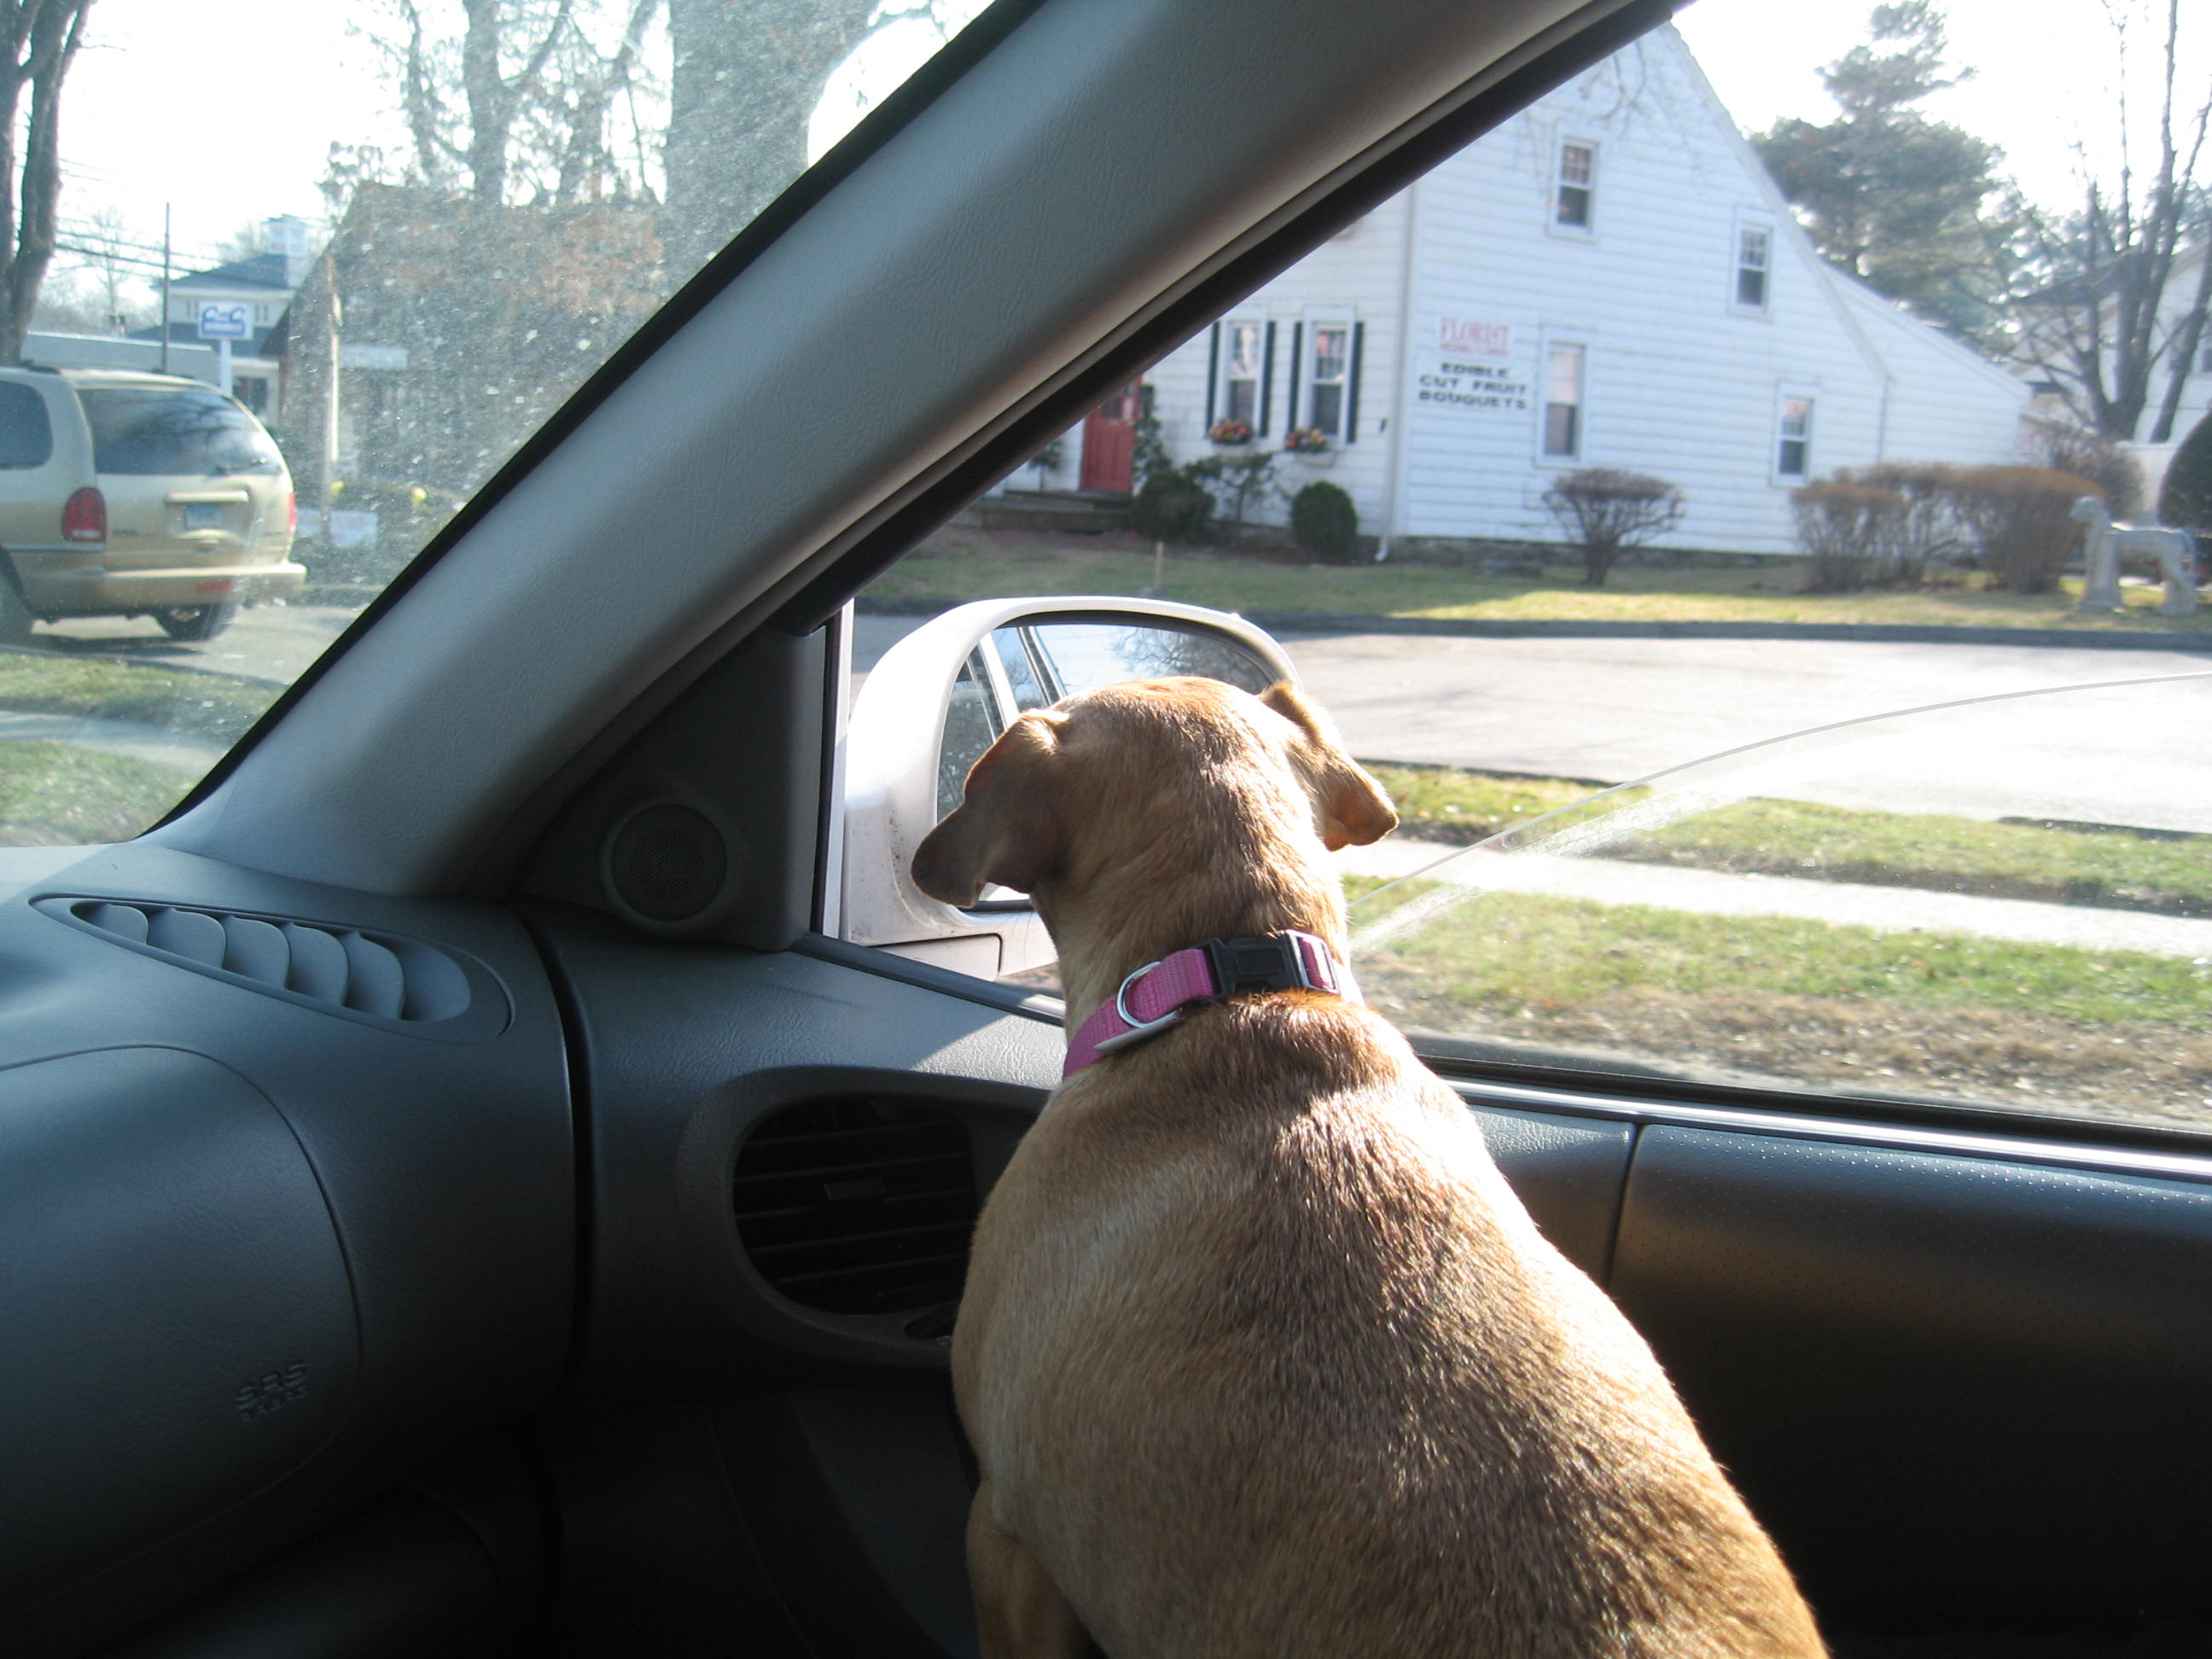 Lucy riding shotgun, barking at anything that moves and wagging her tail like a college student on Spring Break